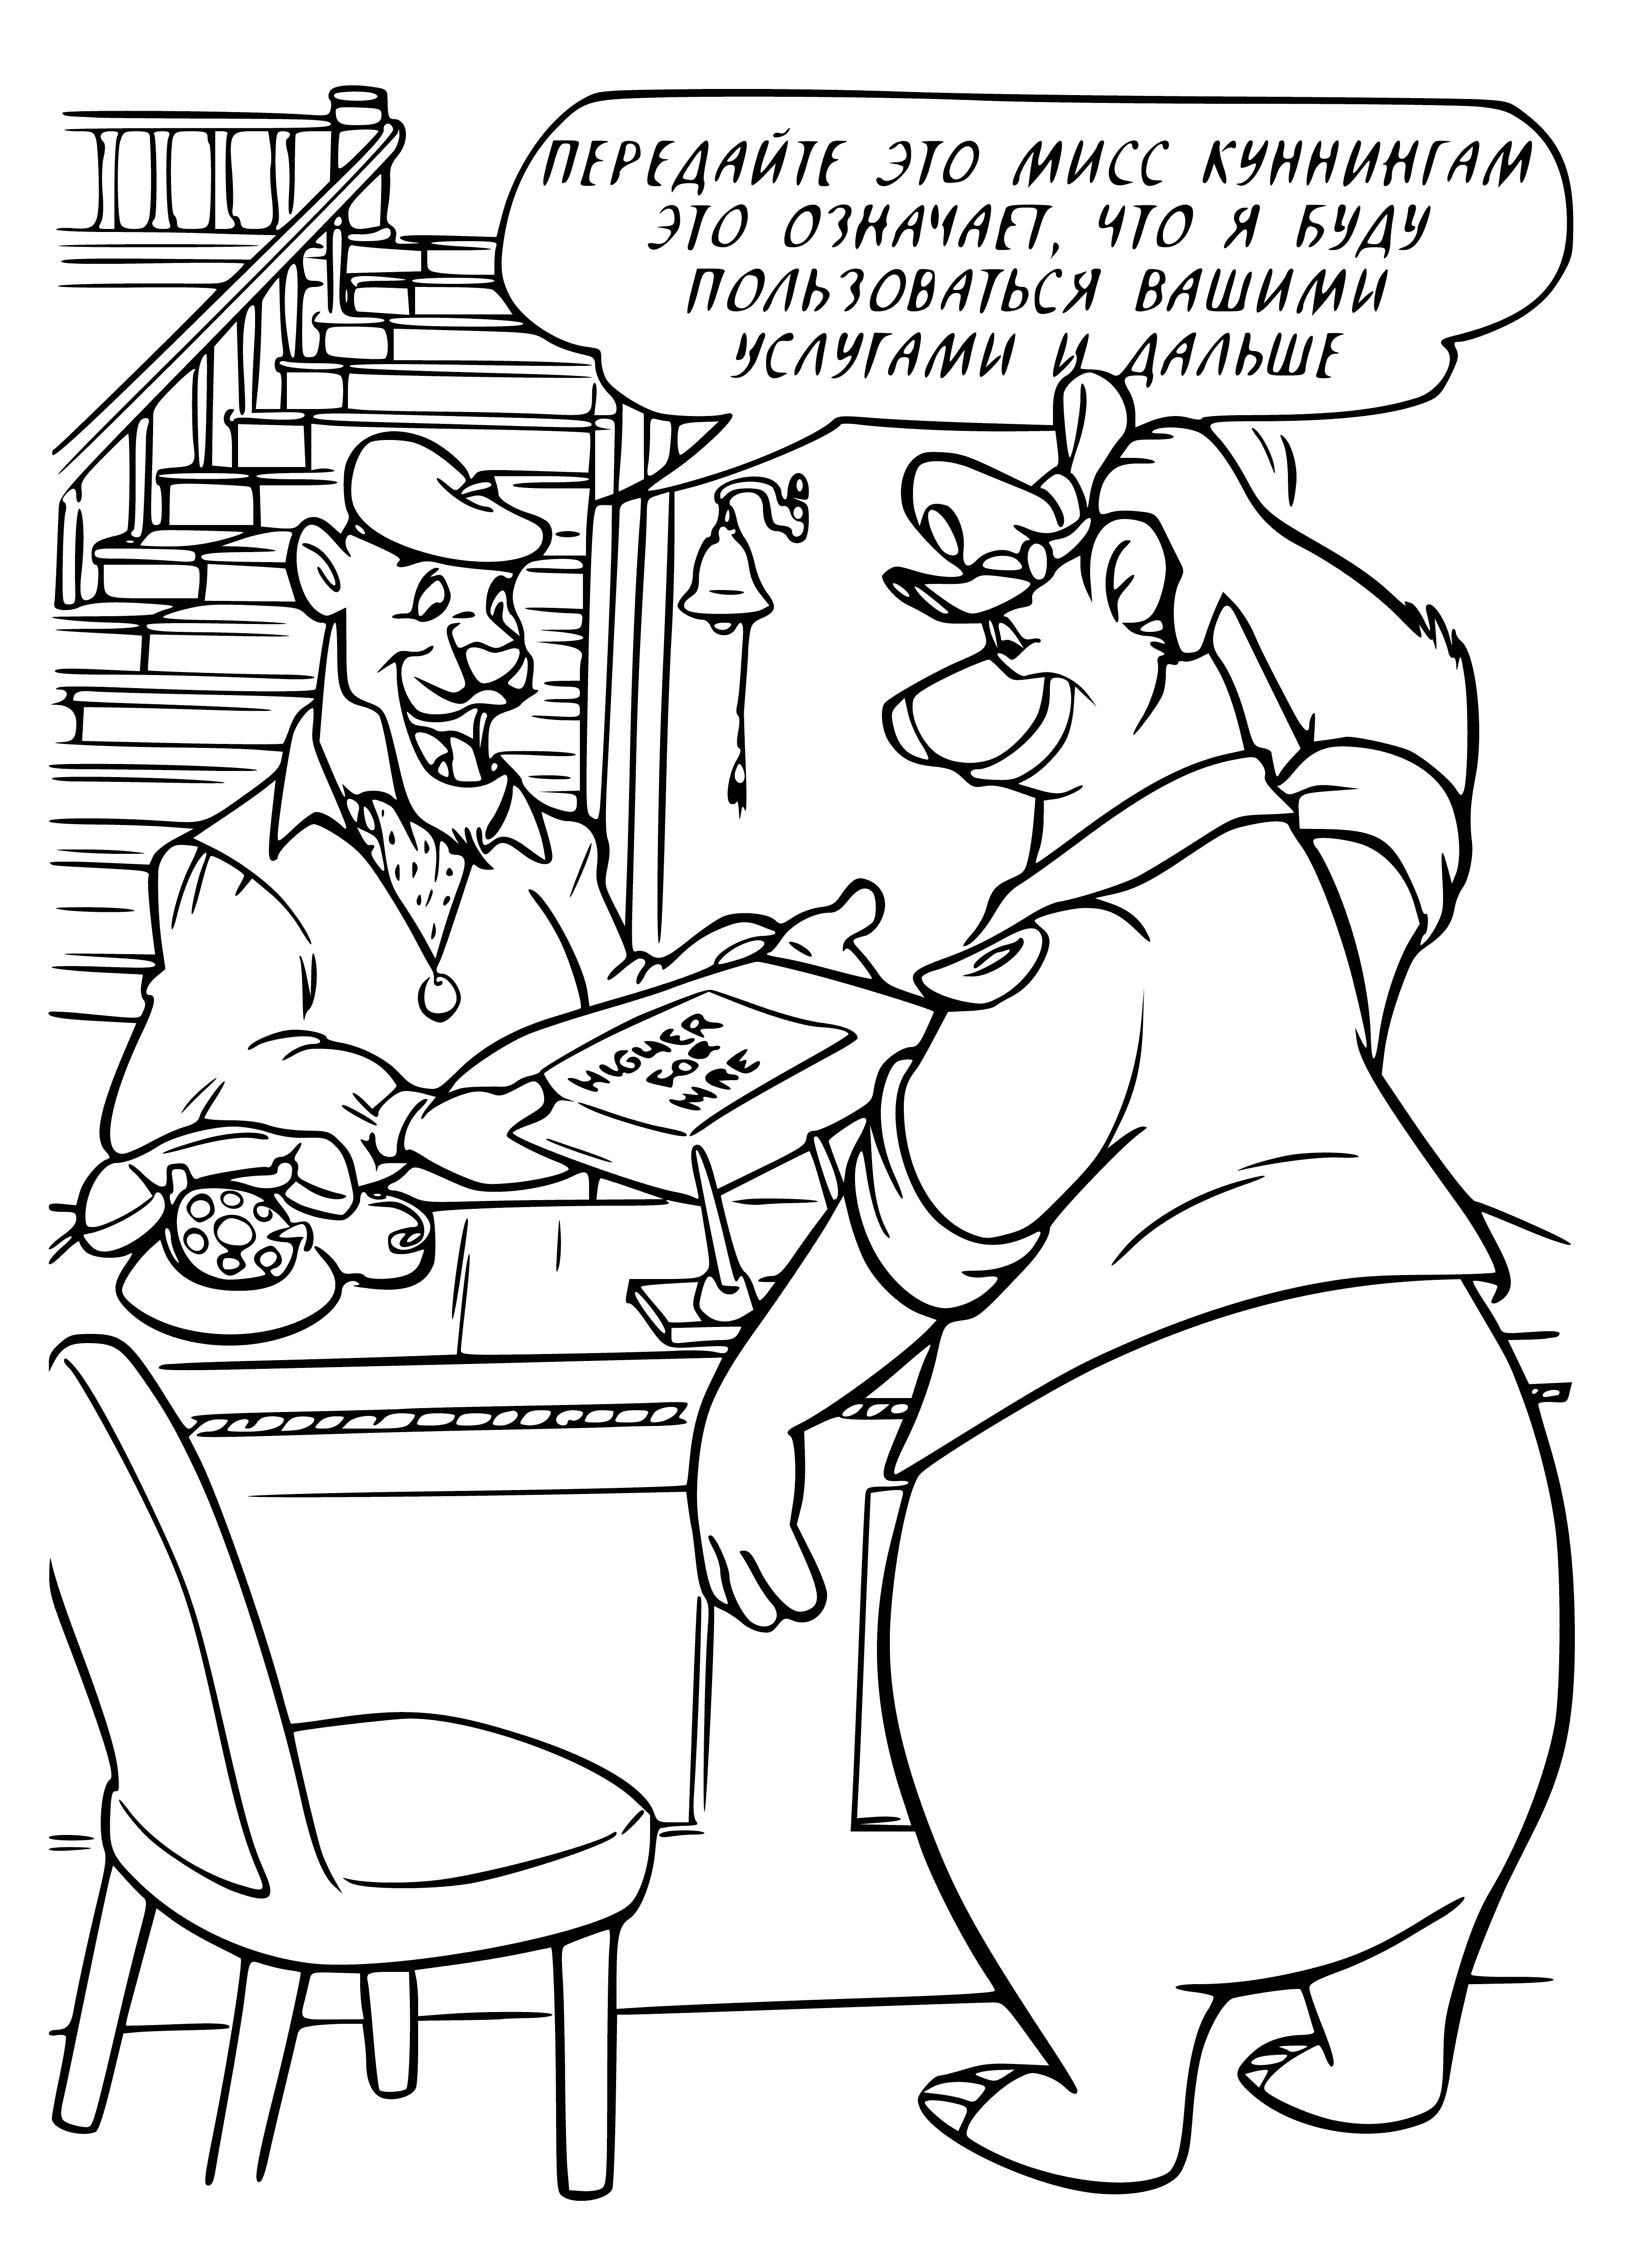 Rebecca's package coloring page